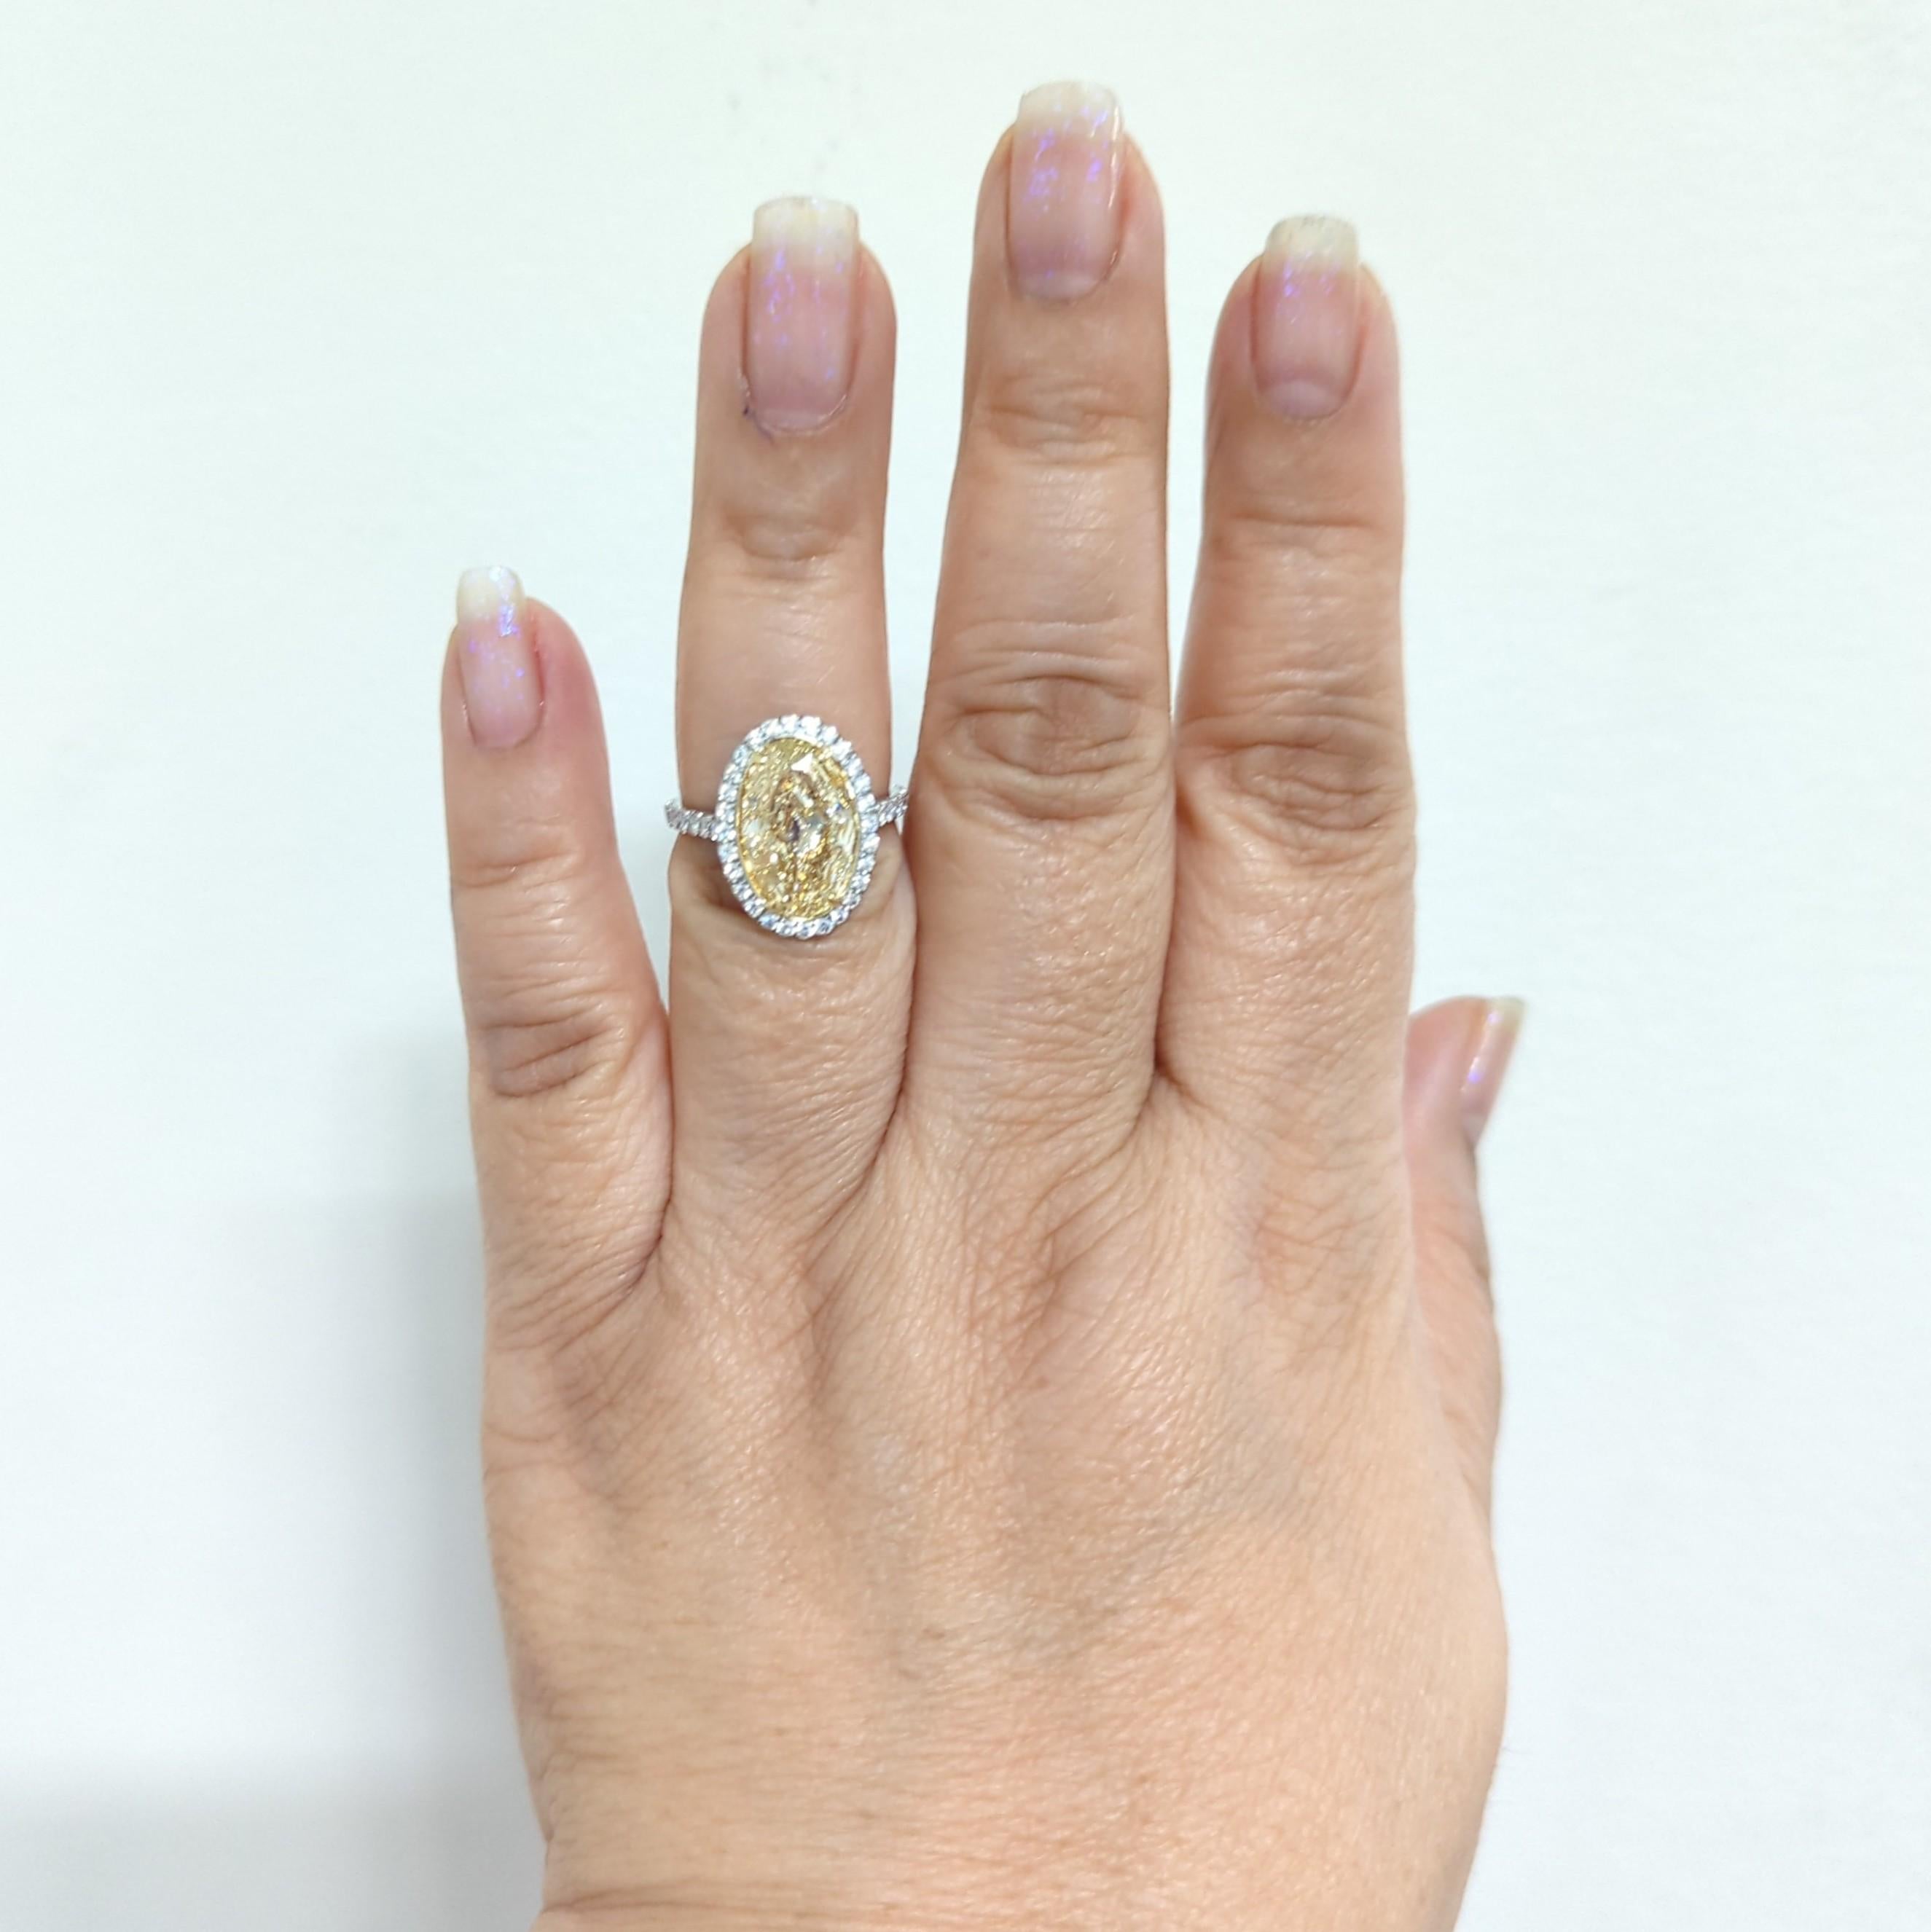 Gorgeous 5.01 ct. natural yellow diamond oval with 0.85 ct. good quality white diamond rounds.  Handmade in 18k white and yellow gold.  Ring size 6.5.  This ring is stunning in person.  There are no certificates but an appraisal can be provided.